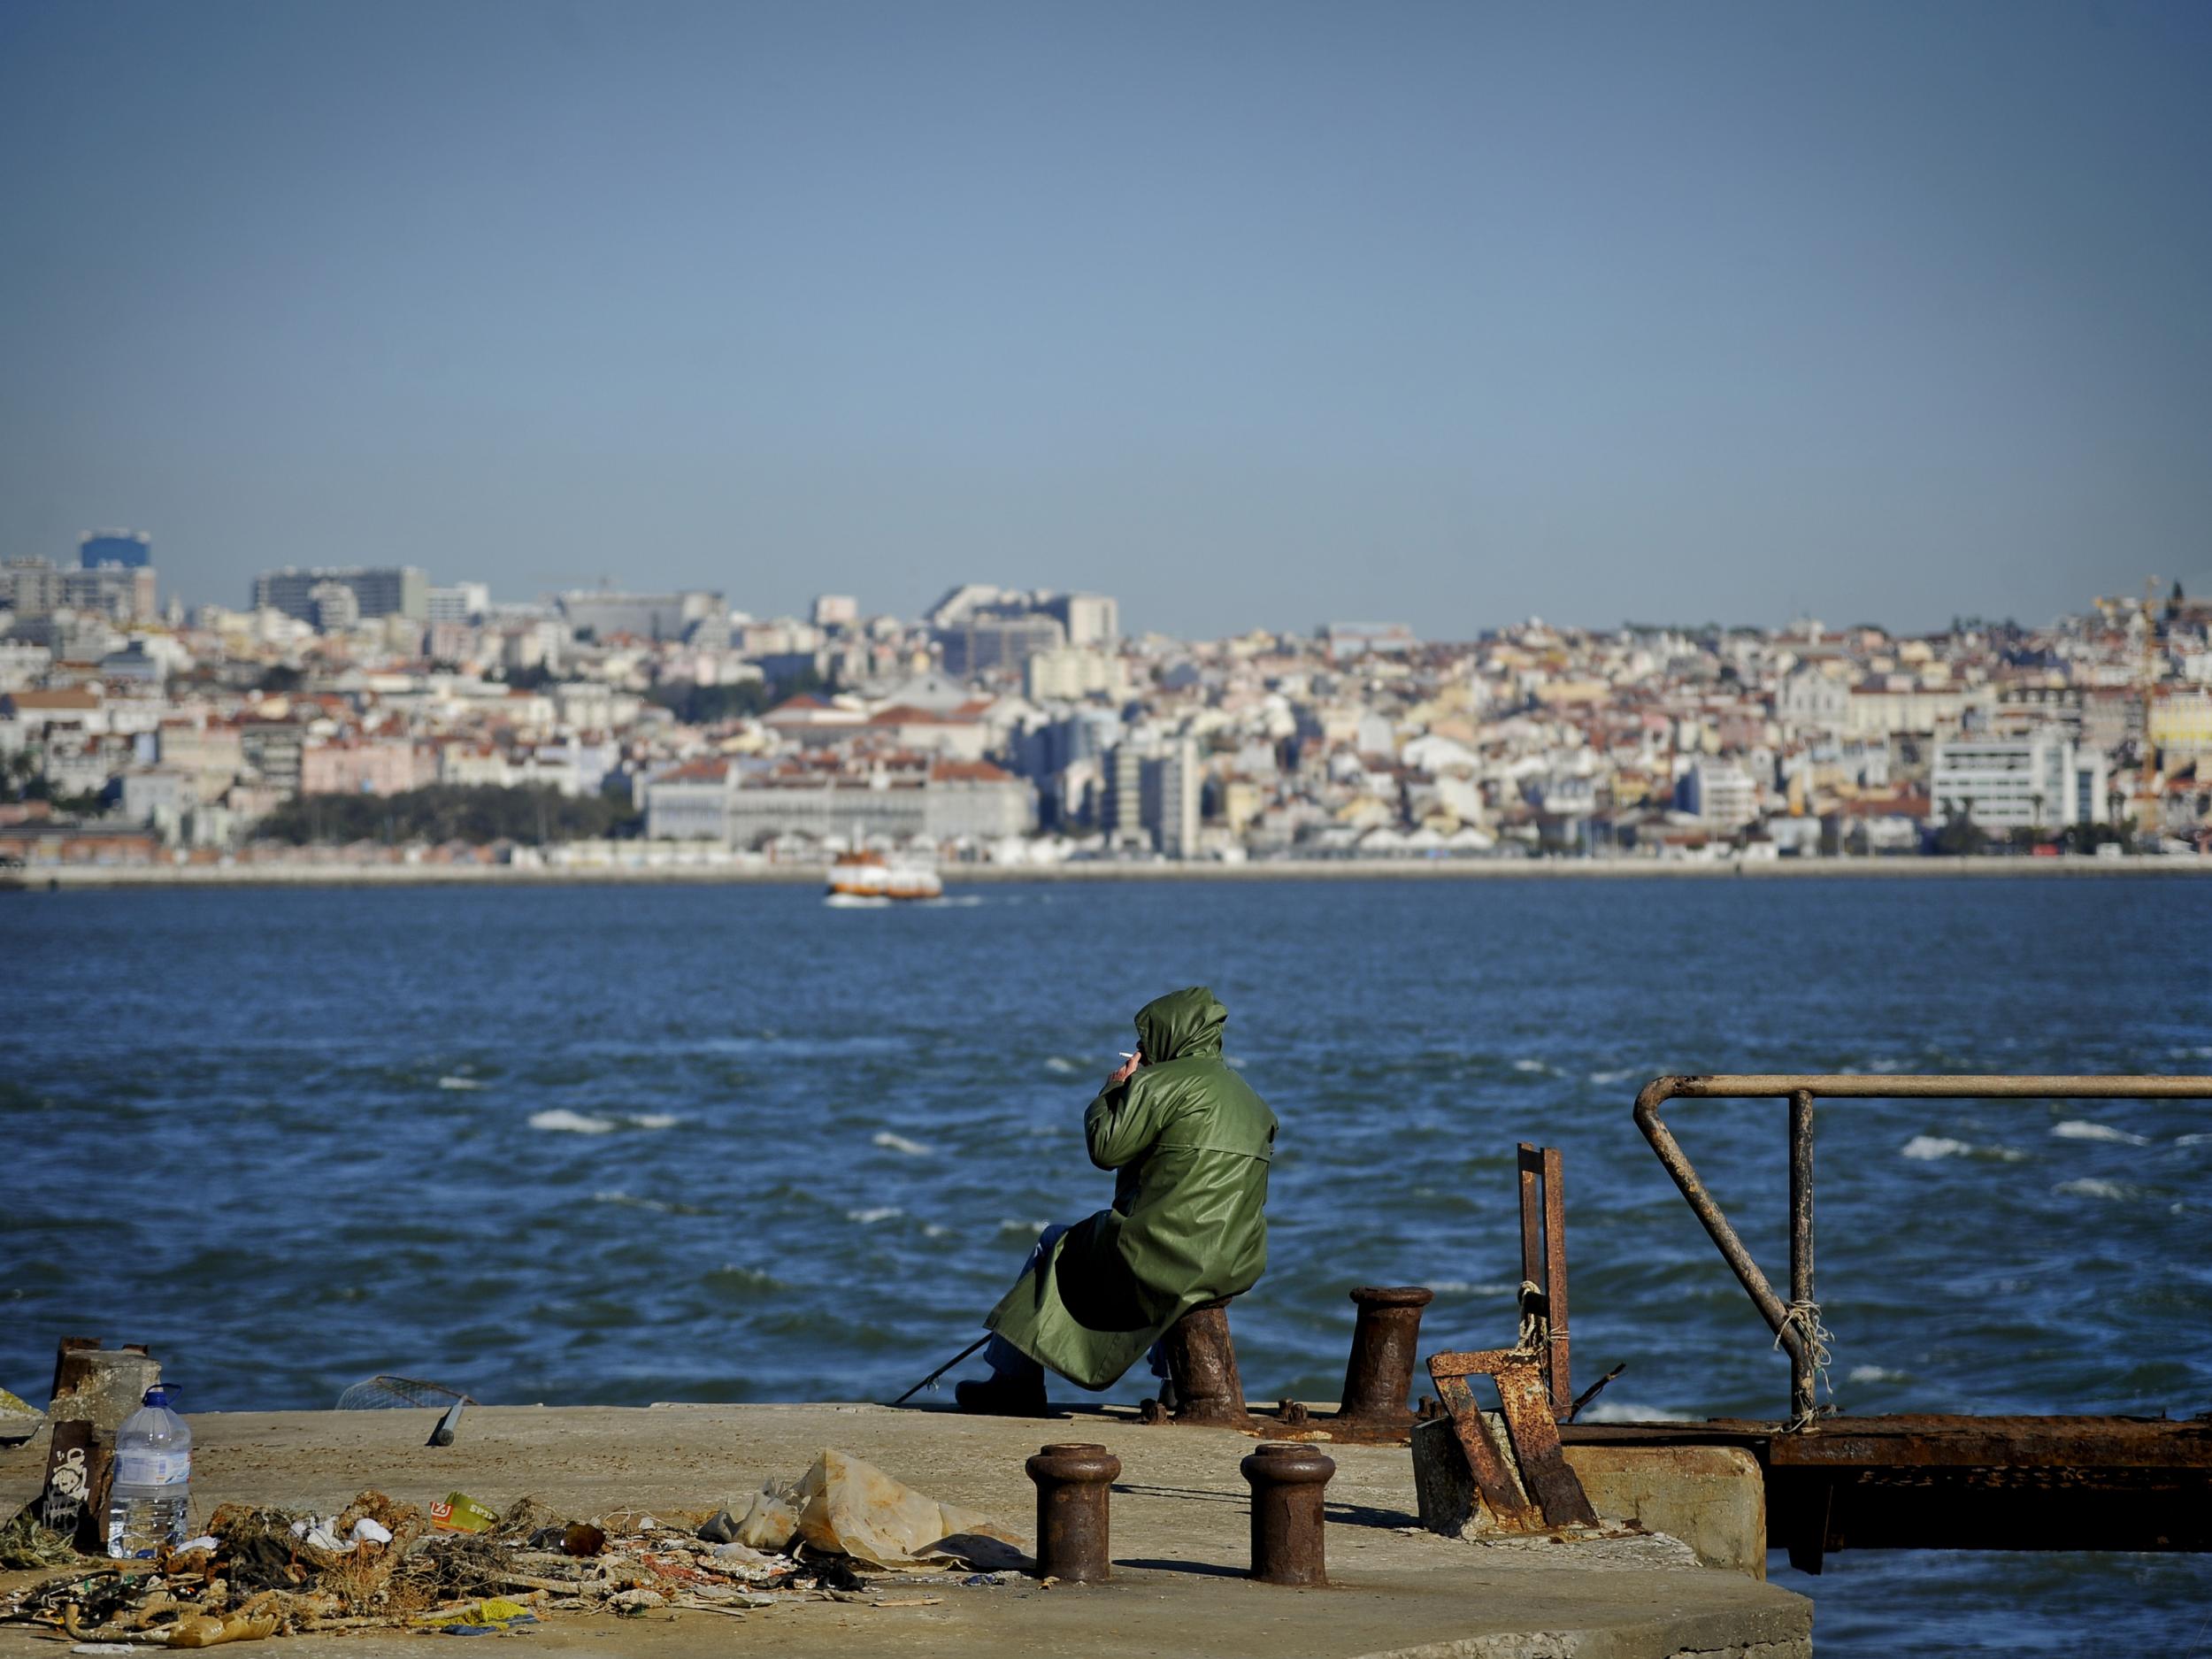 Only 10 per cent of Americans get treatment for addiction; in Portugal, treatment is standard